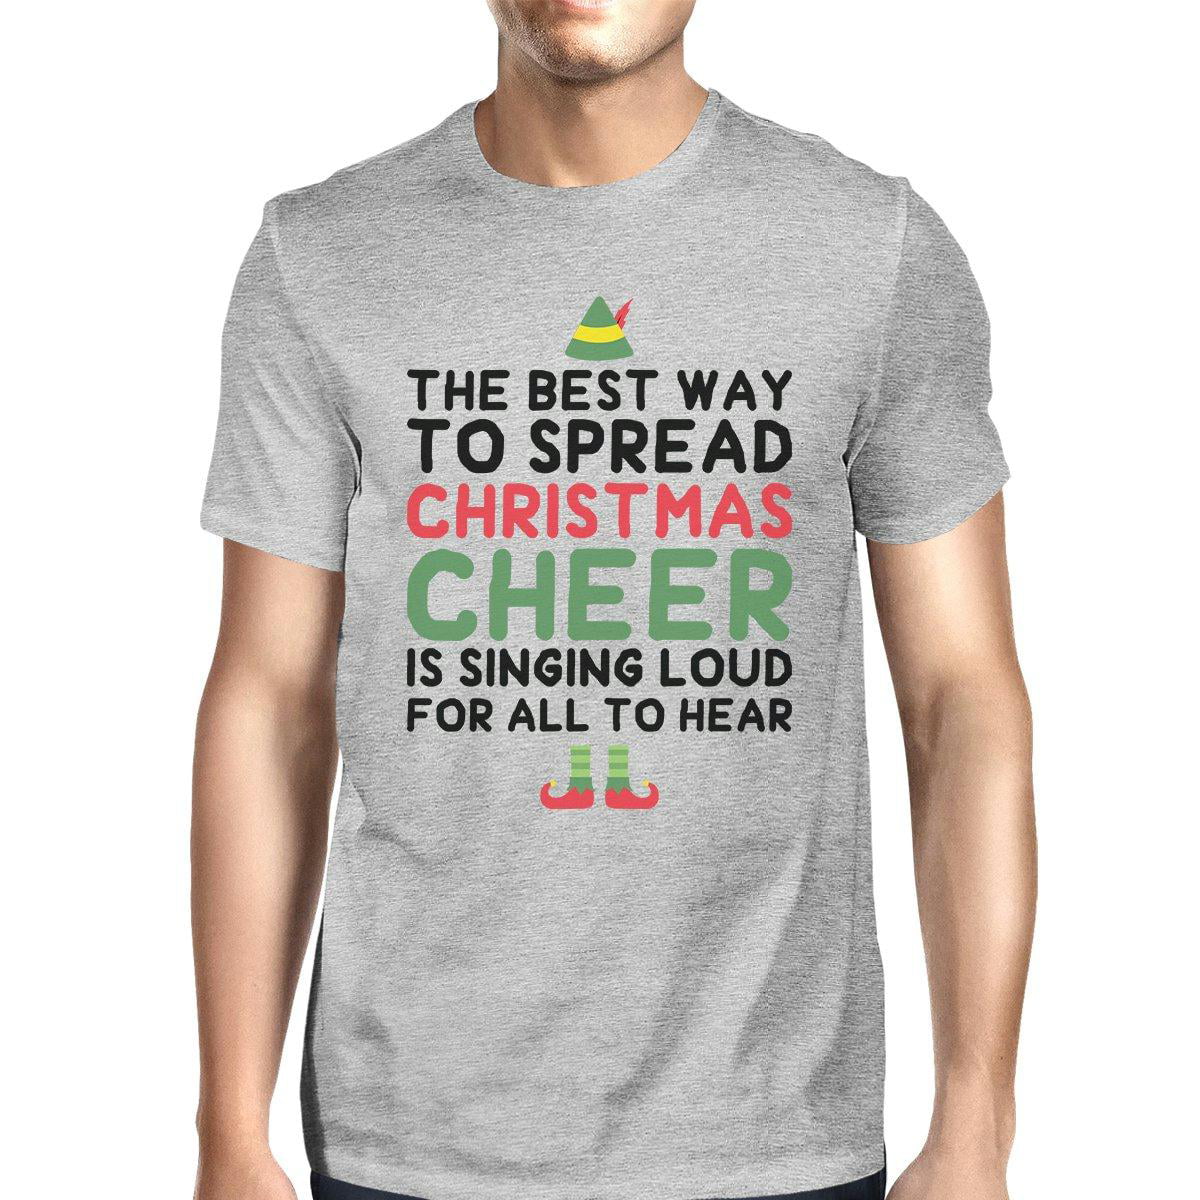 The Best Way To Spread Christmas Cheer Is Singing Loud For All To Hear Tshirt Gift For Xmas Holiday